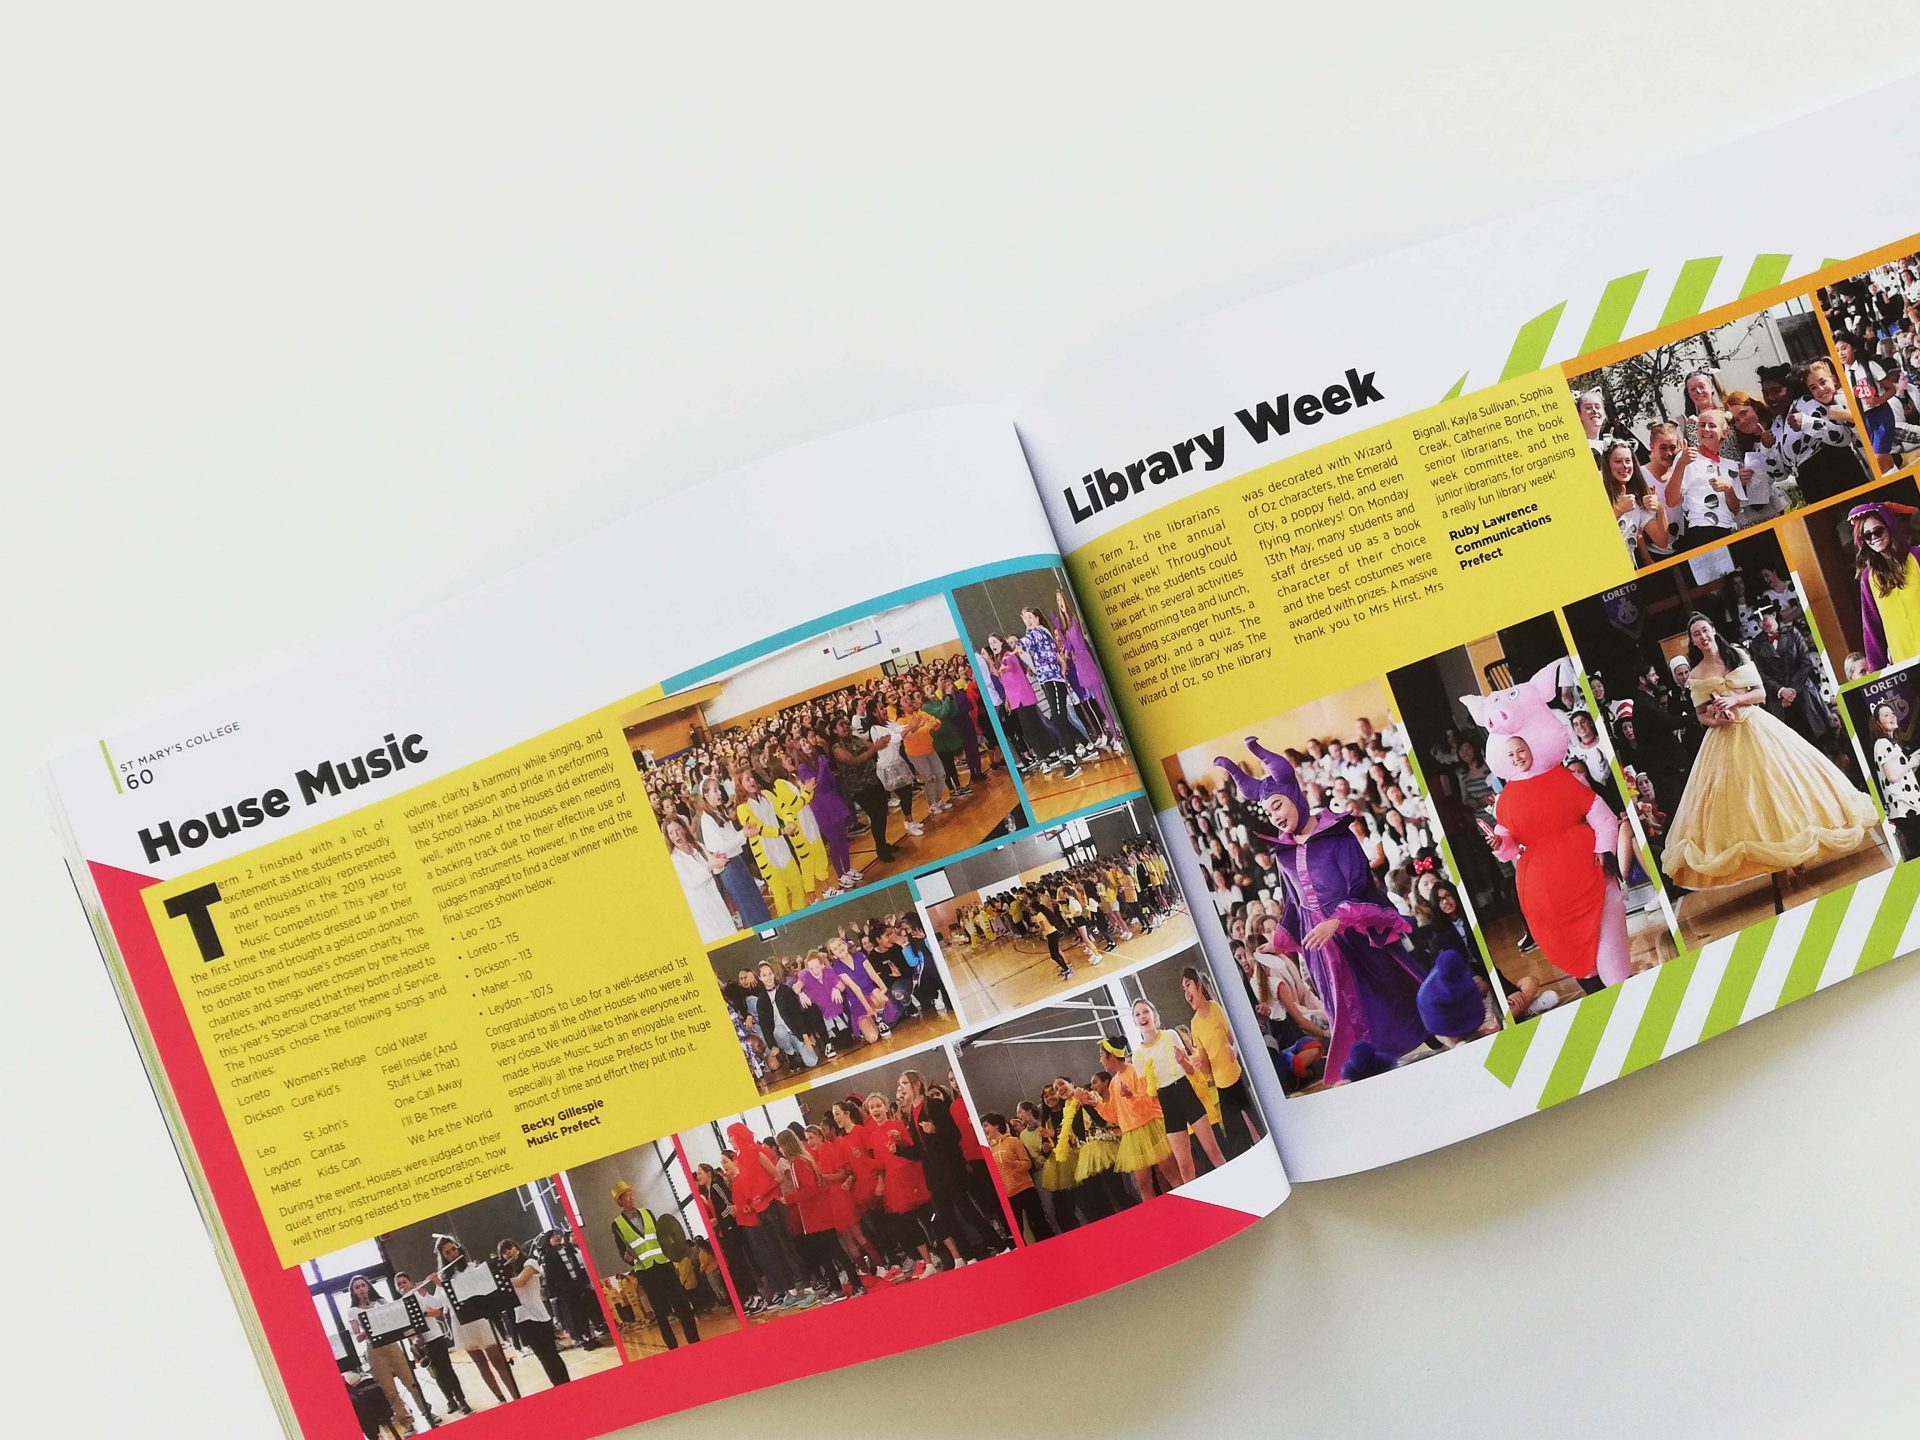 spacific-creative-school-yearbook-design-from-2019-spacific-creative